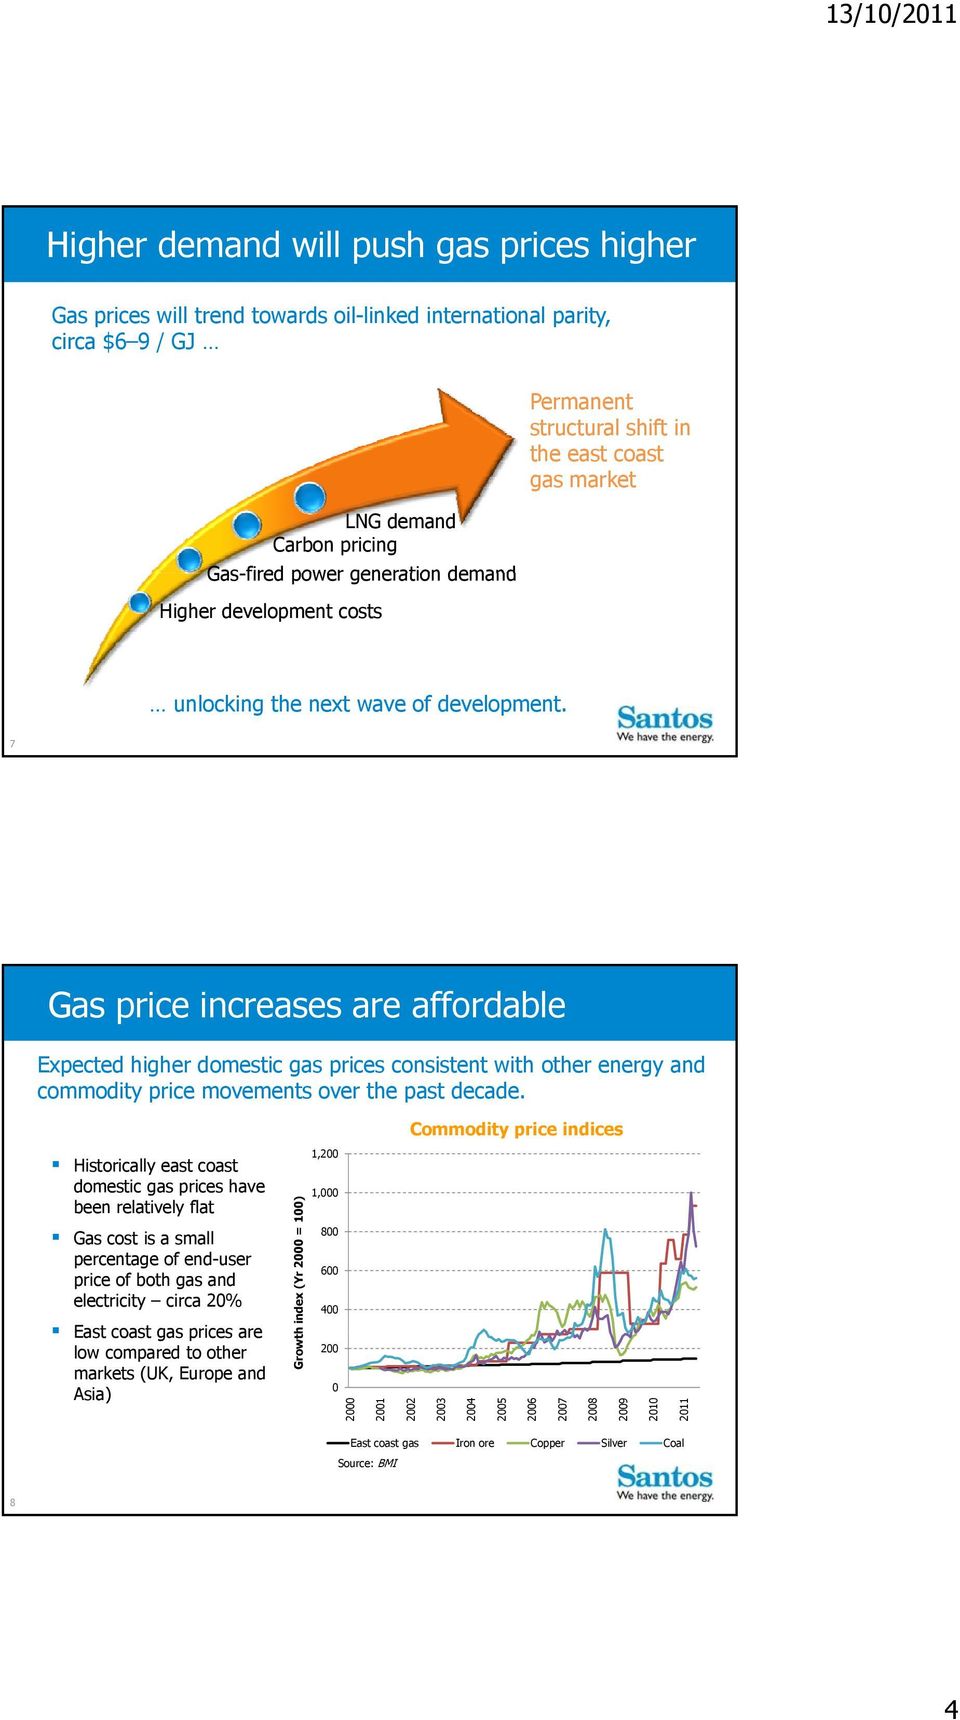 7 Gas price increases are affordable Expected higher domestic gas prices consistent with other energy and commodity price movements over the past decade.